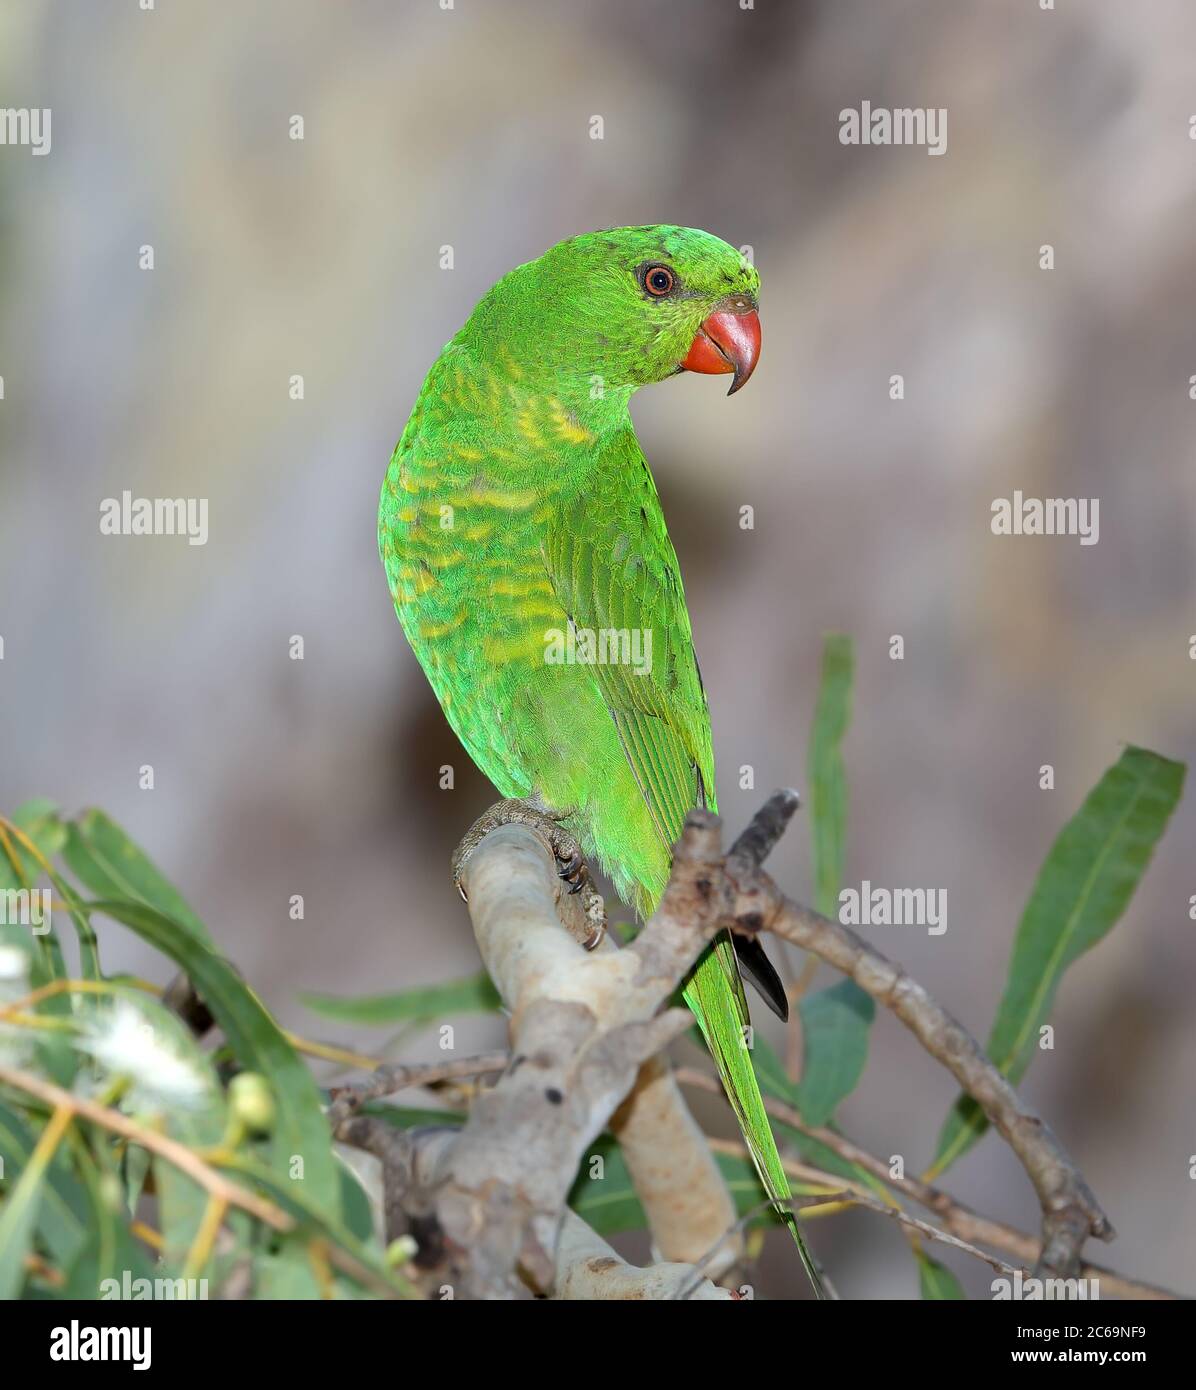 Scaly-breasted Lorikeet (Trichoglossus chlorolepidotus) at Tyto wetland in Ingham, Queensland, Australia. Stock Photo